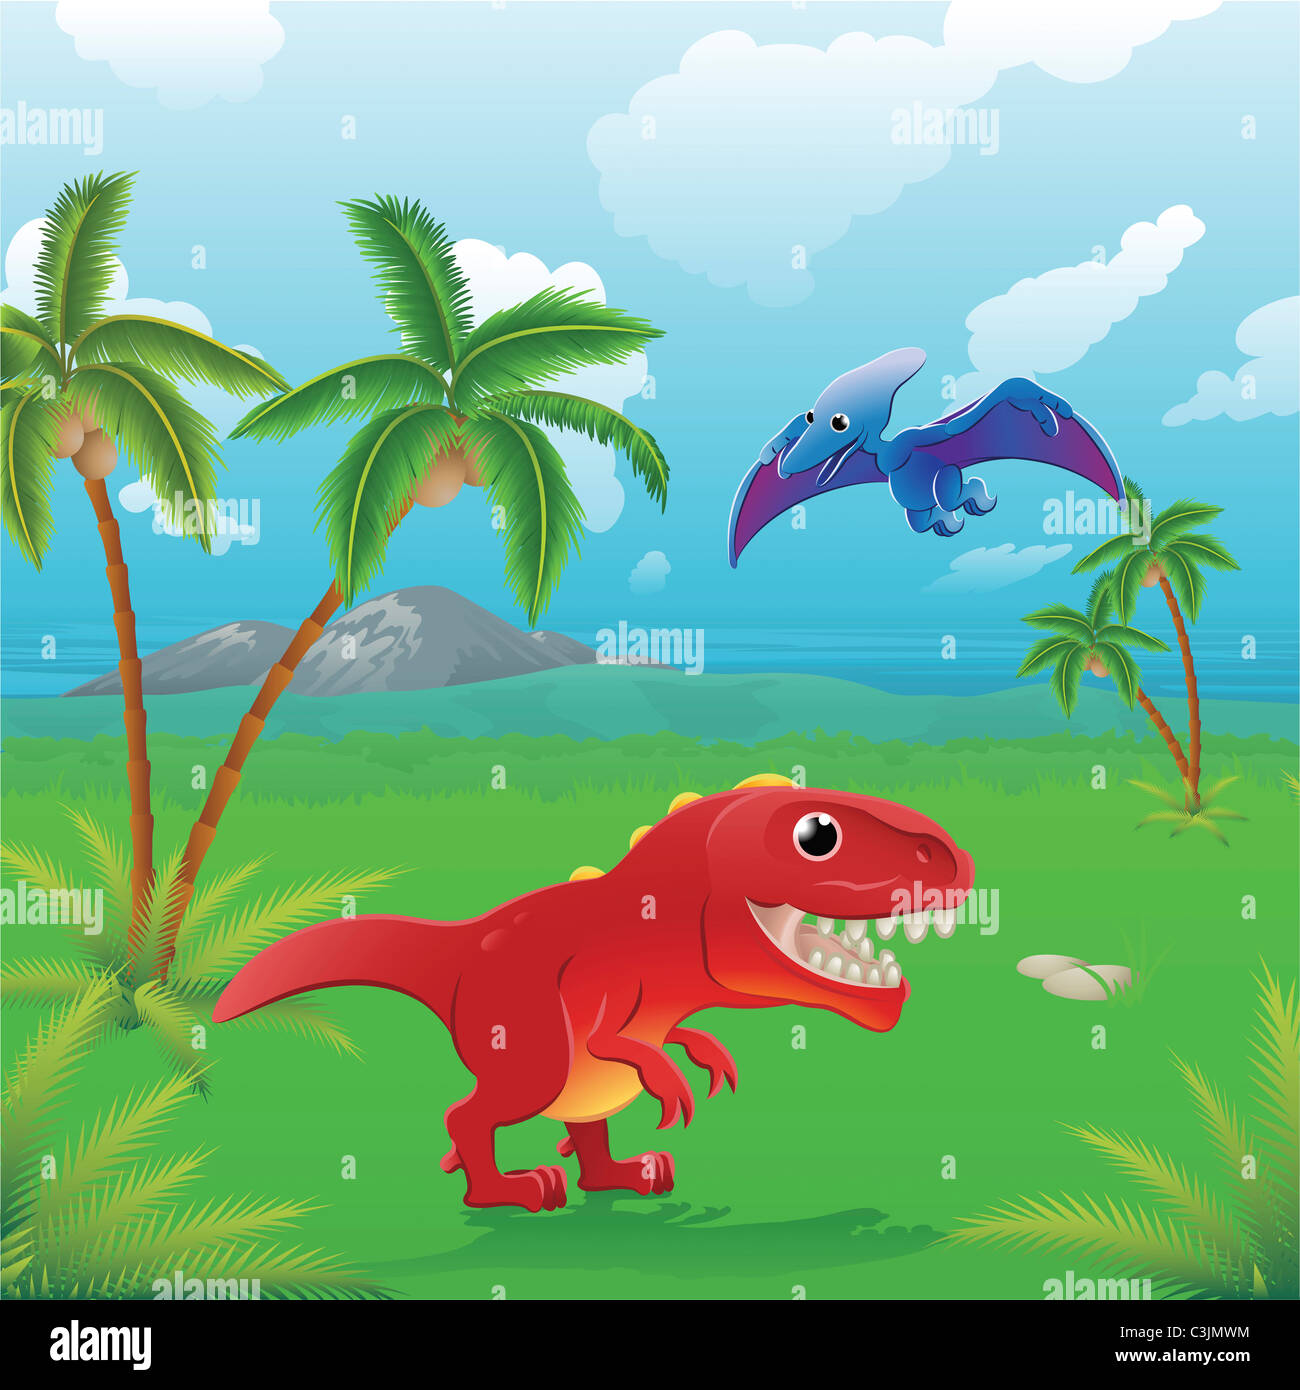 Cute dinosaurs in prehistoric scene. Three illustrations can be used separately or side by side to form panoramic landscape. Stock Photo